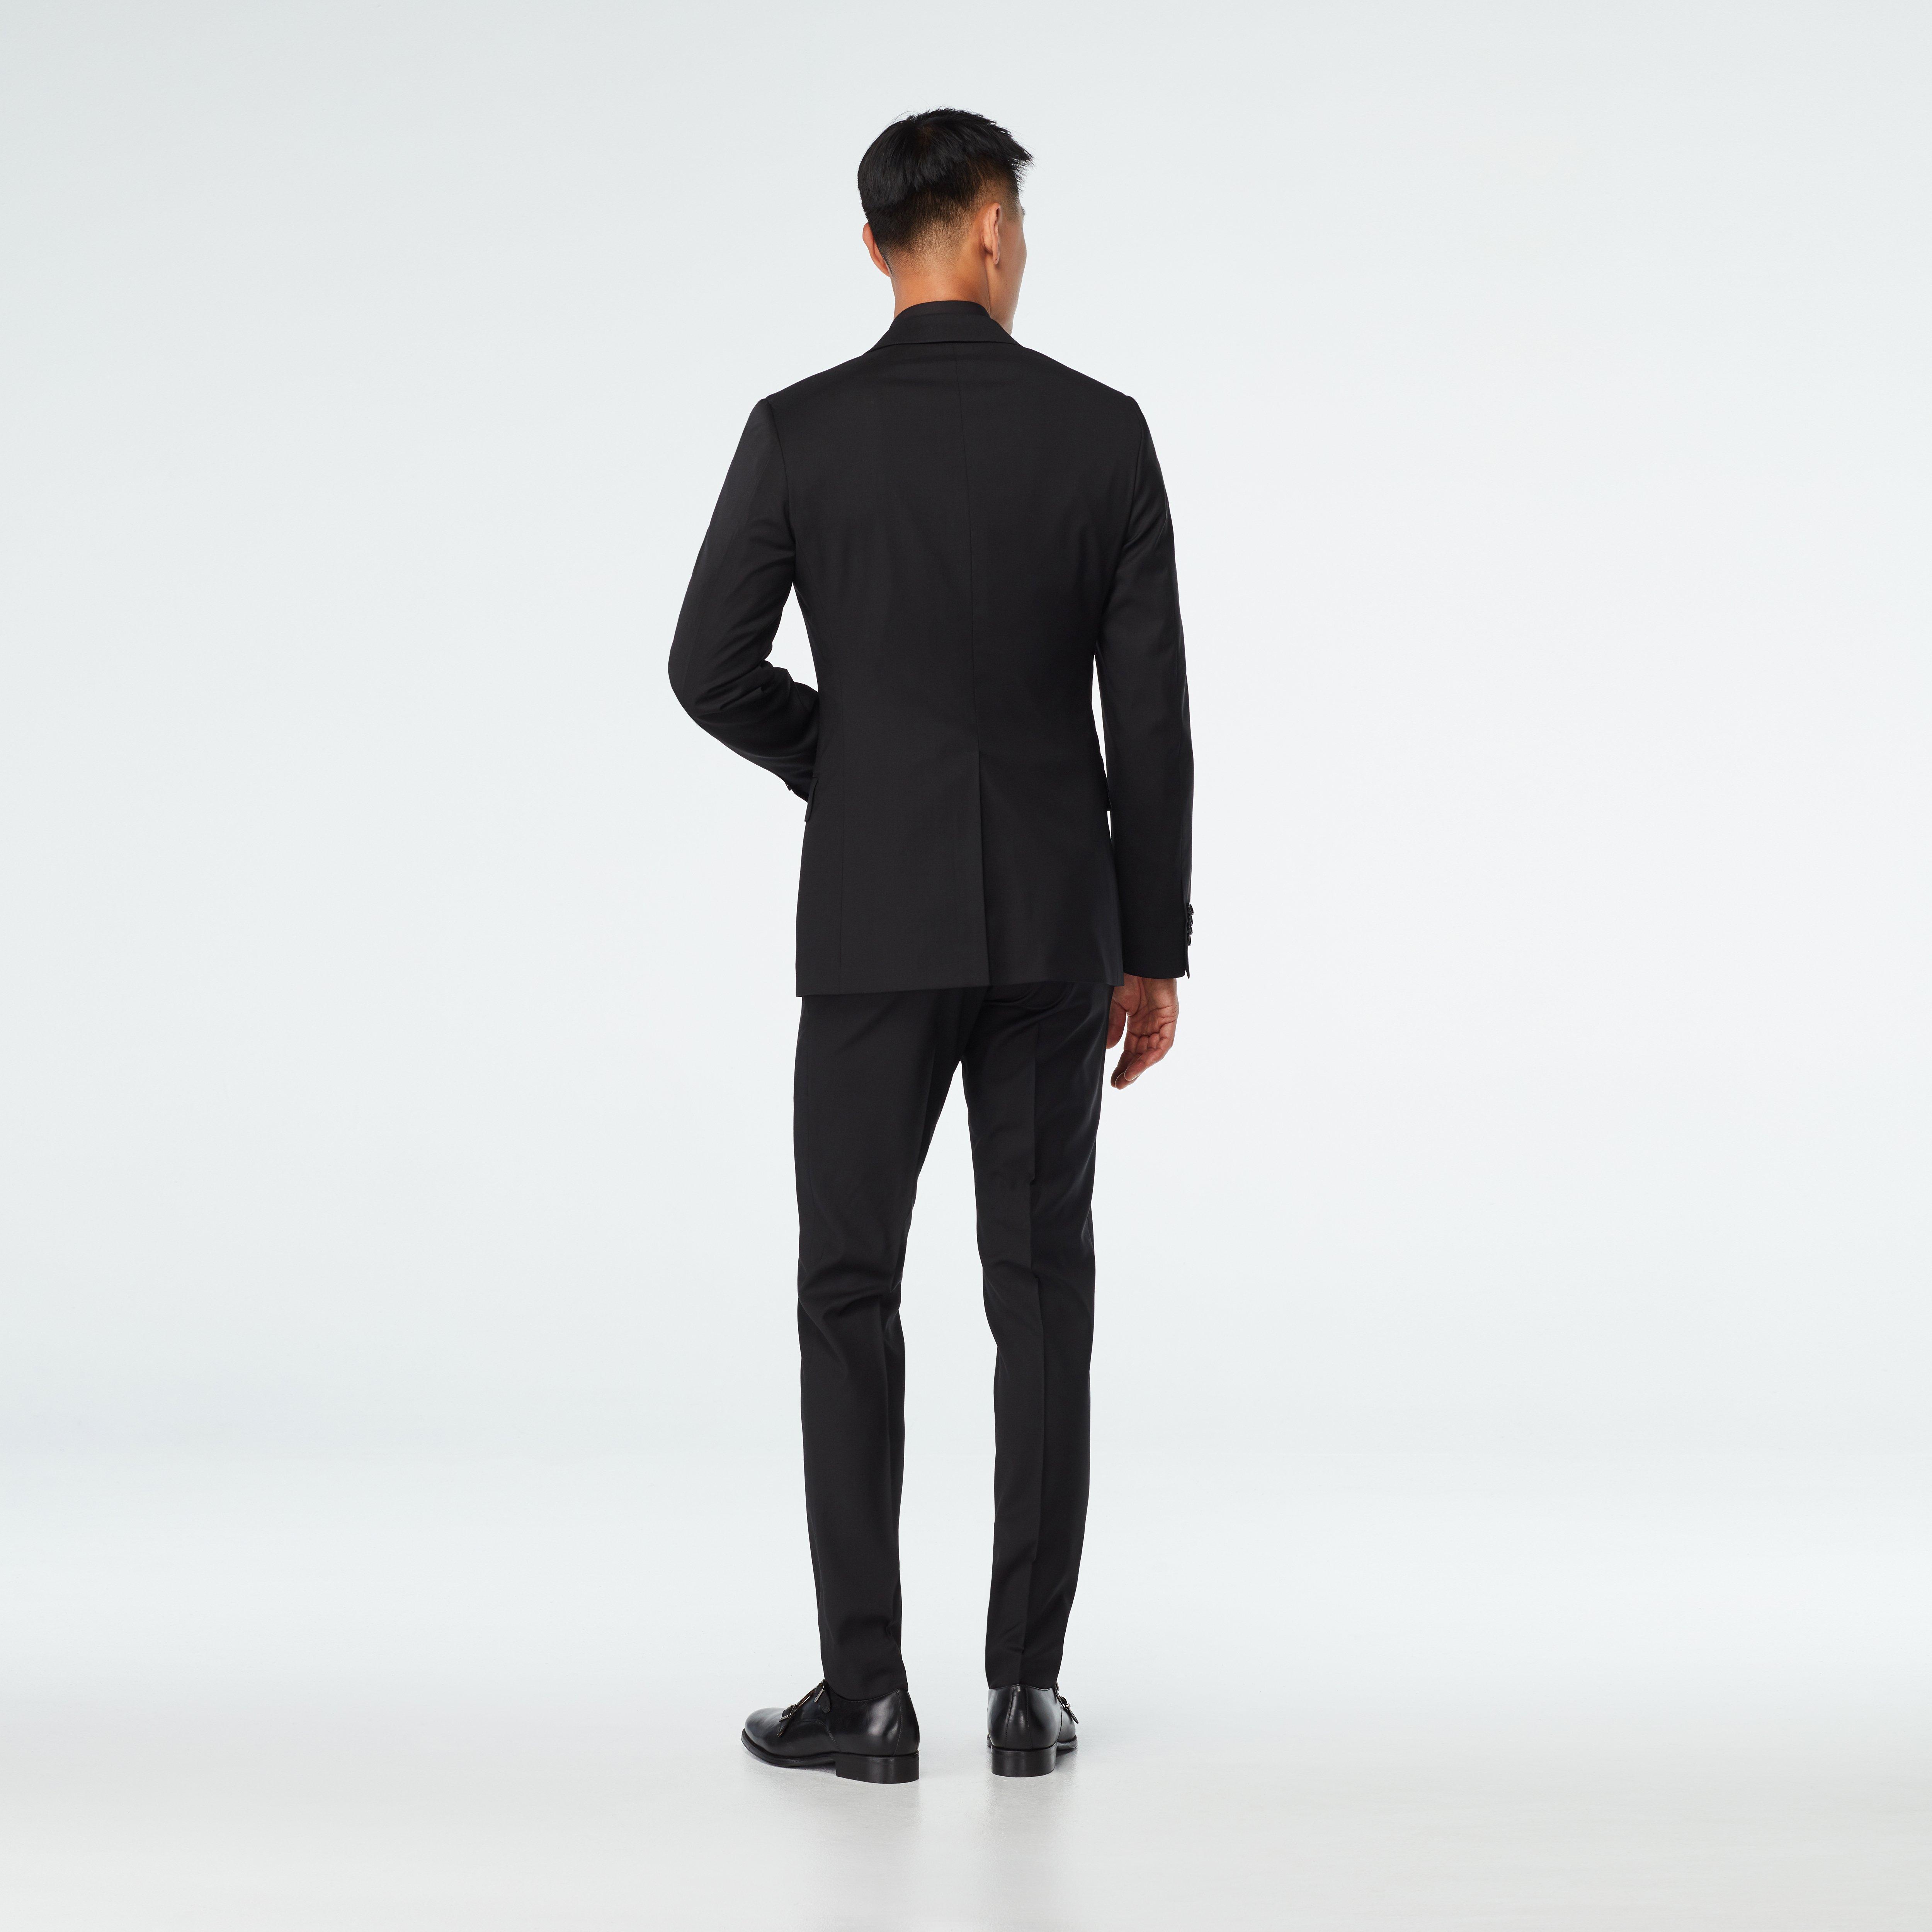 Custom Suits Made For You - Milano Black Suit | INDOCHINO